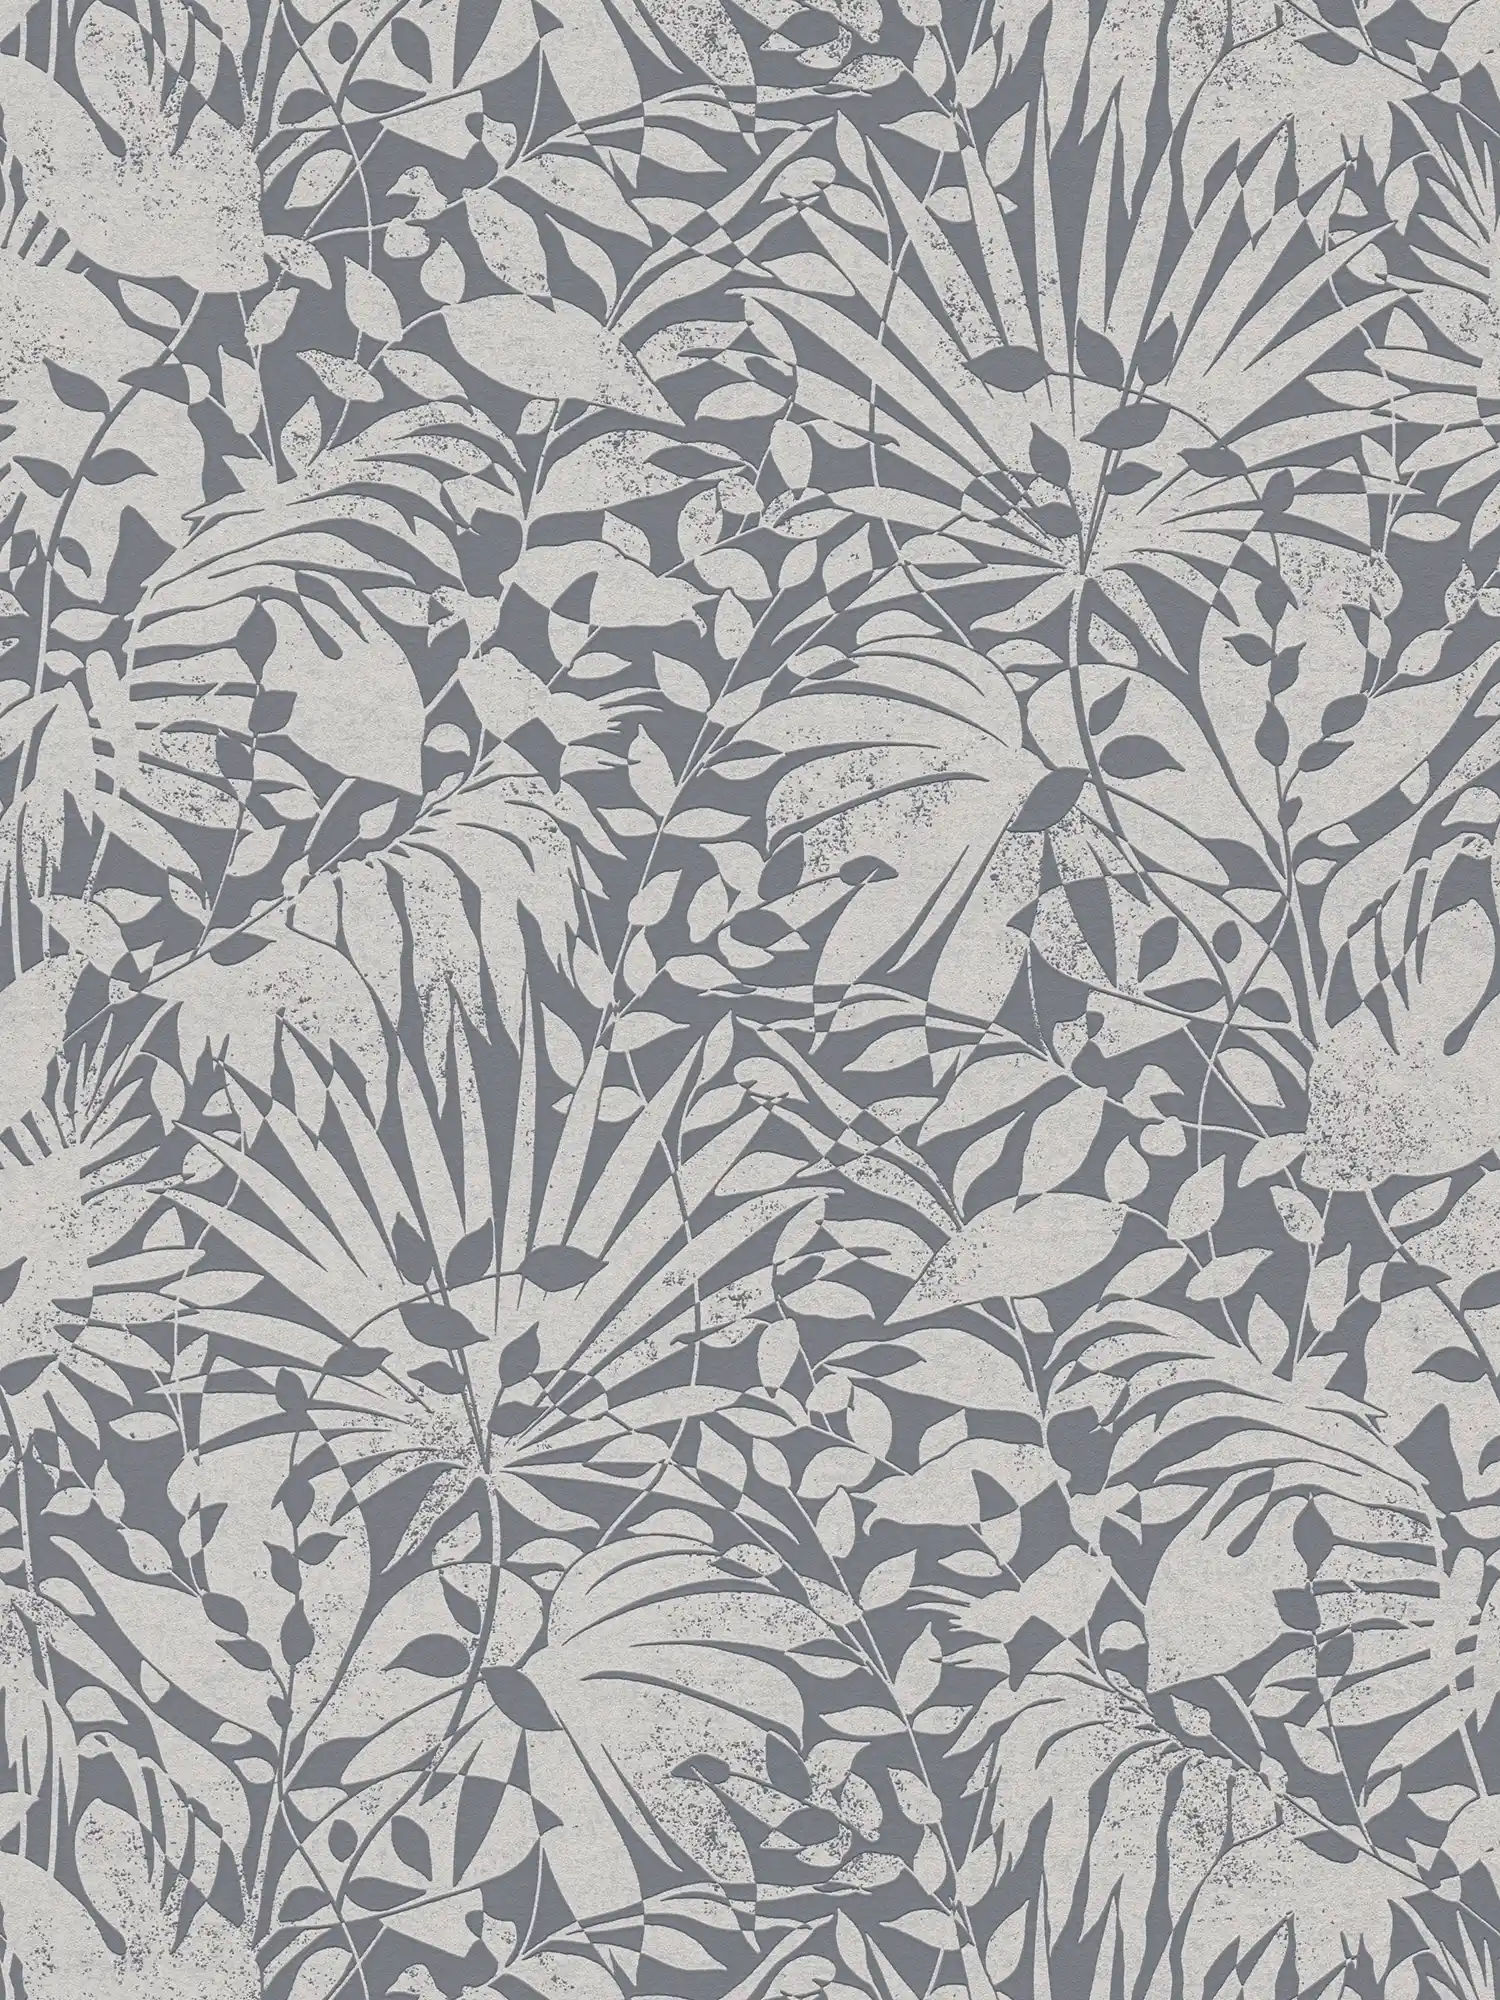 Silver wallpaper with leaves design and texture effect
